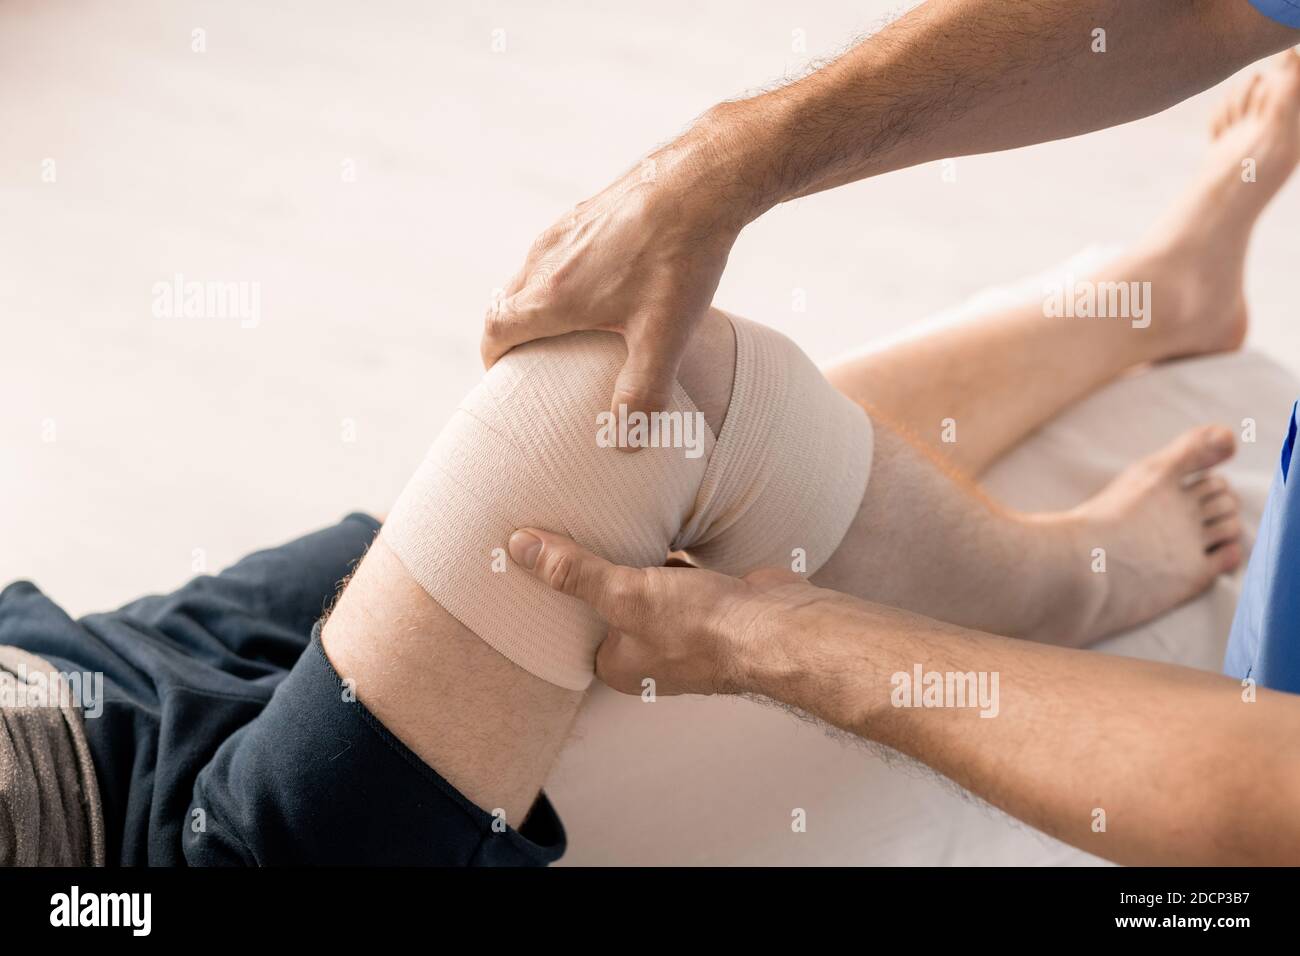 Hands of male clinician wrapping knee of disable patient with flexible bandage Stock Photo